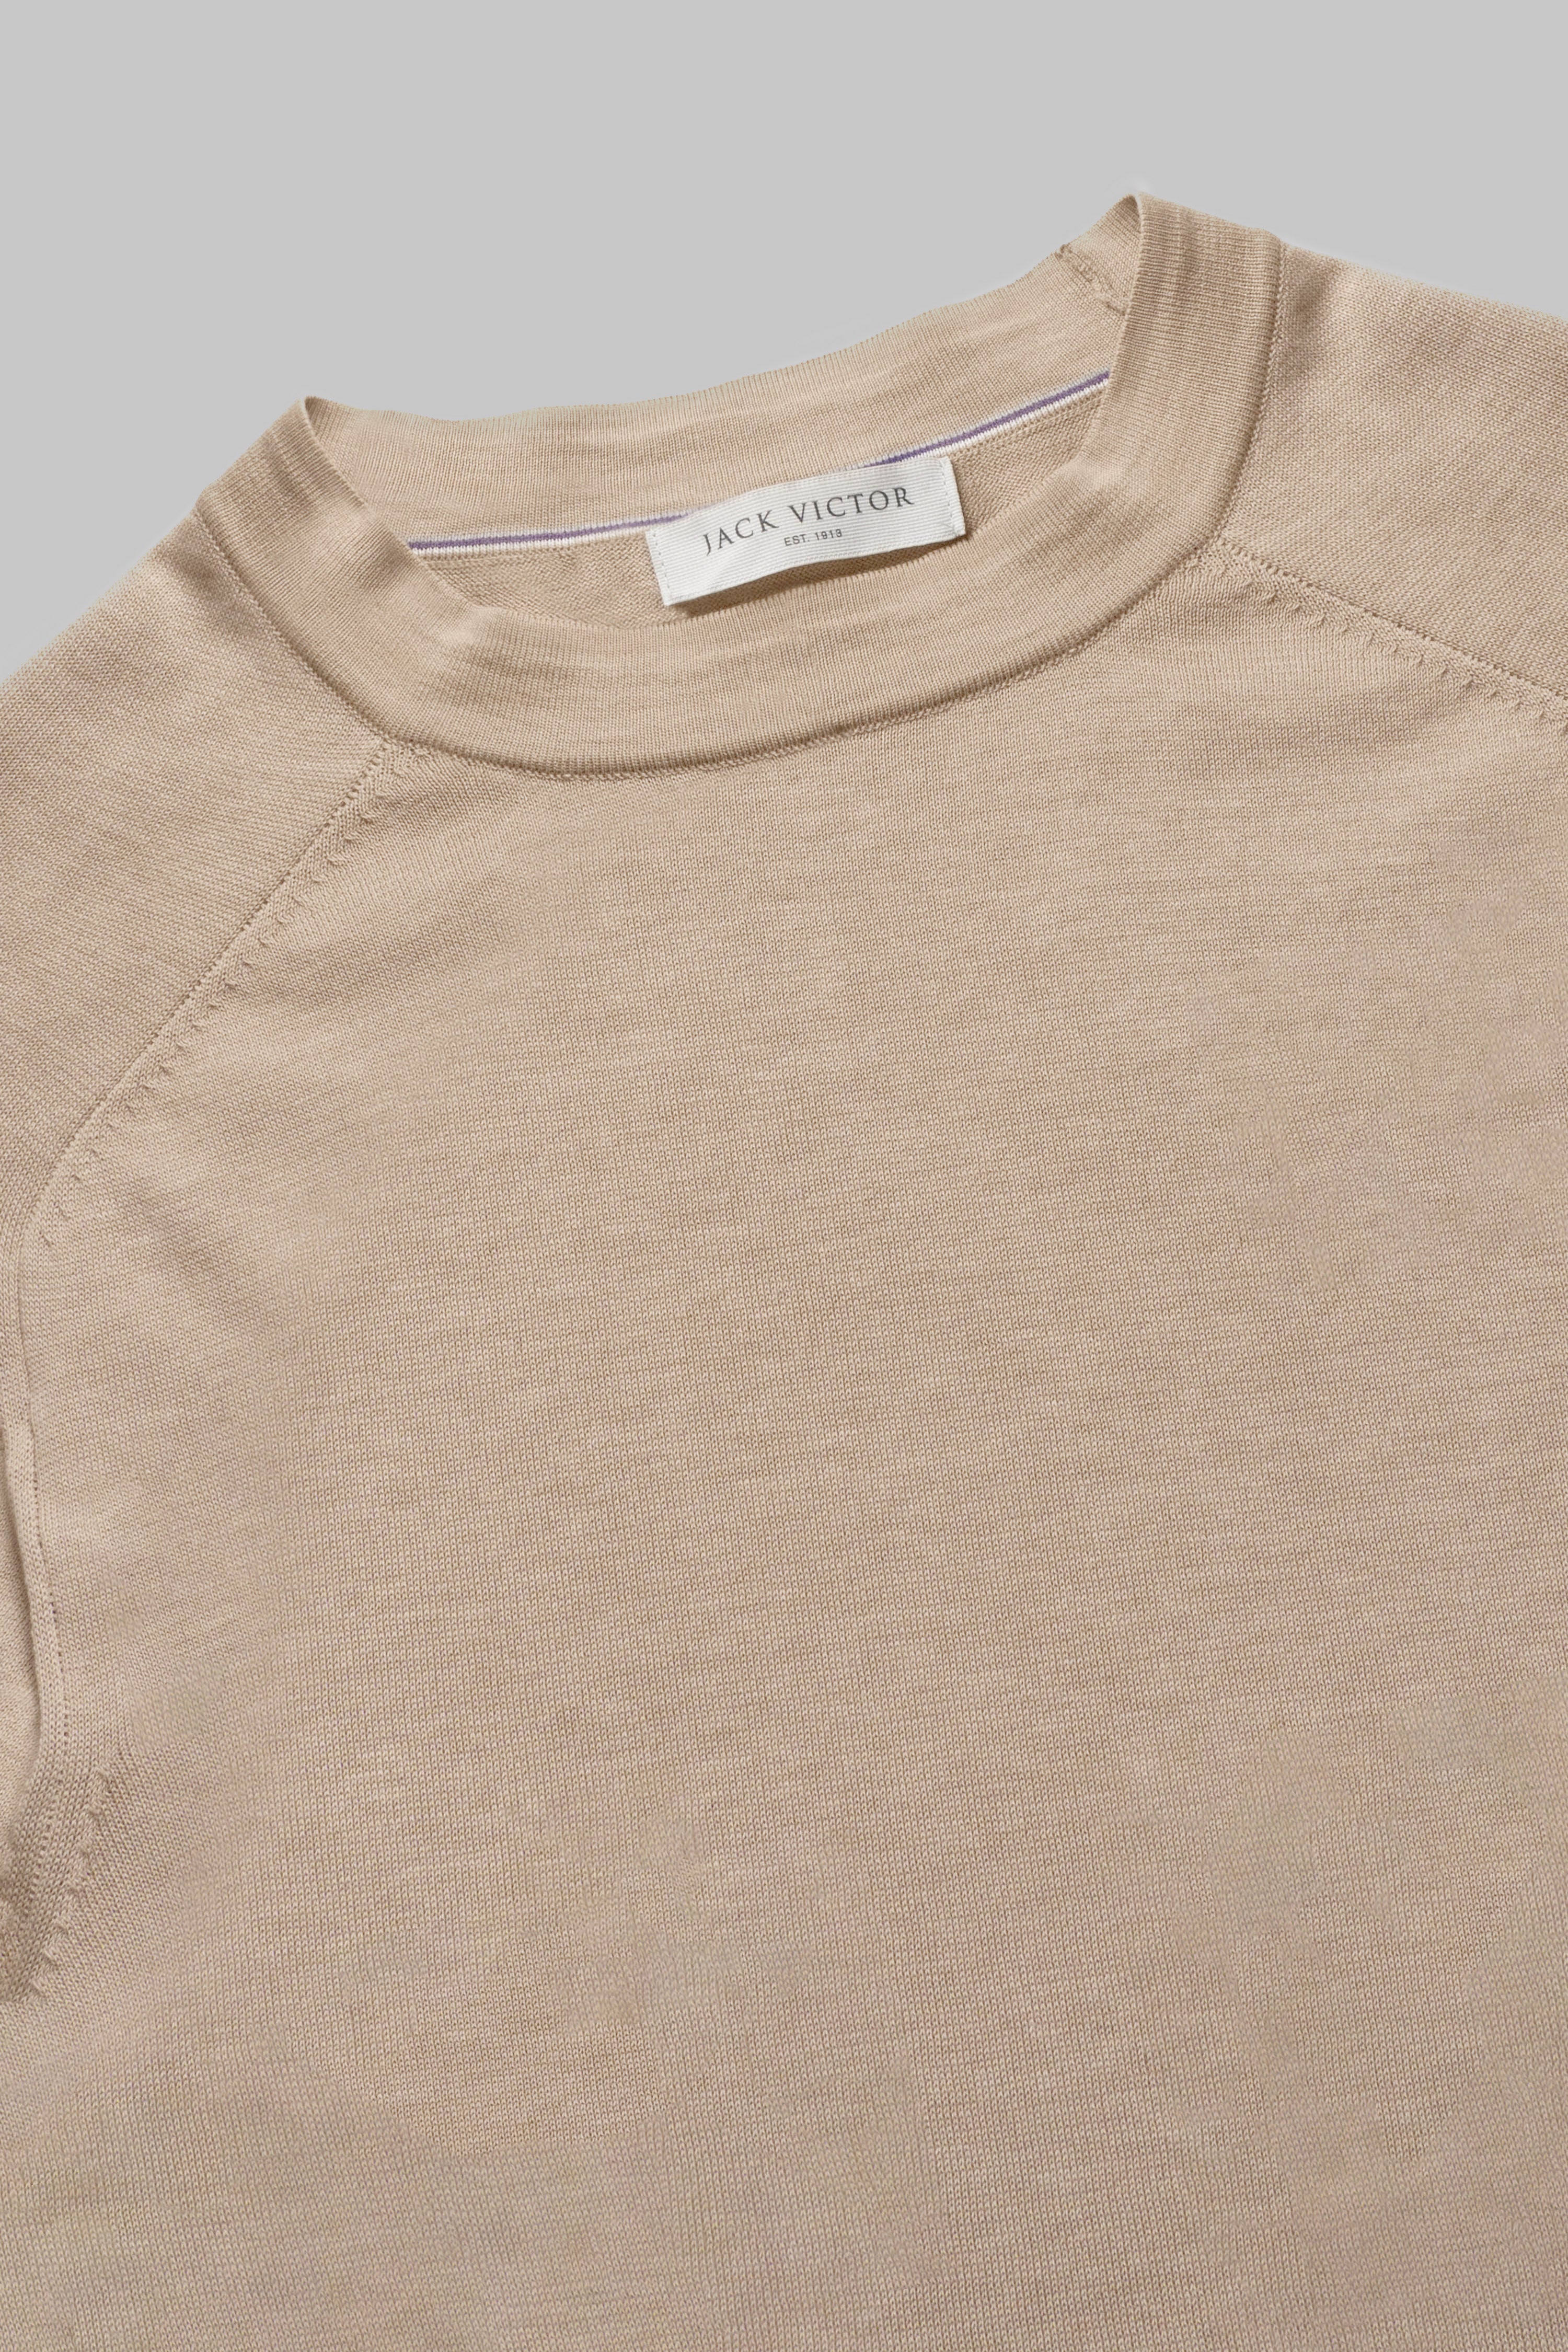 Tan SetiCo Cotton and Silk Knit Crew Neck-SS Tee-Jack Victor